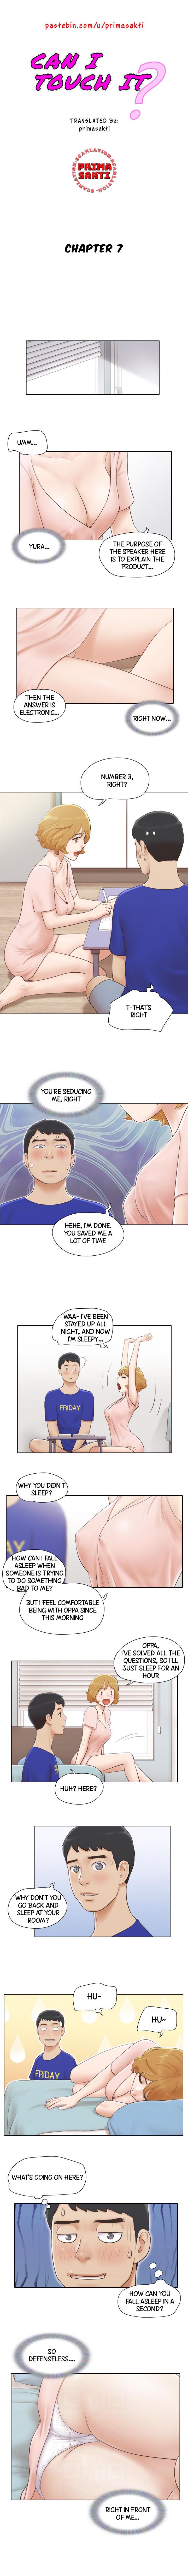 Can I Touch It? - Chapter 7 Page 2